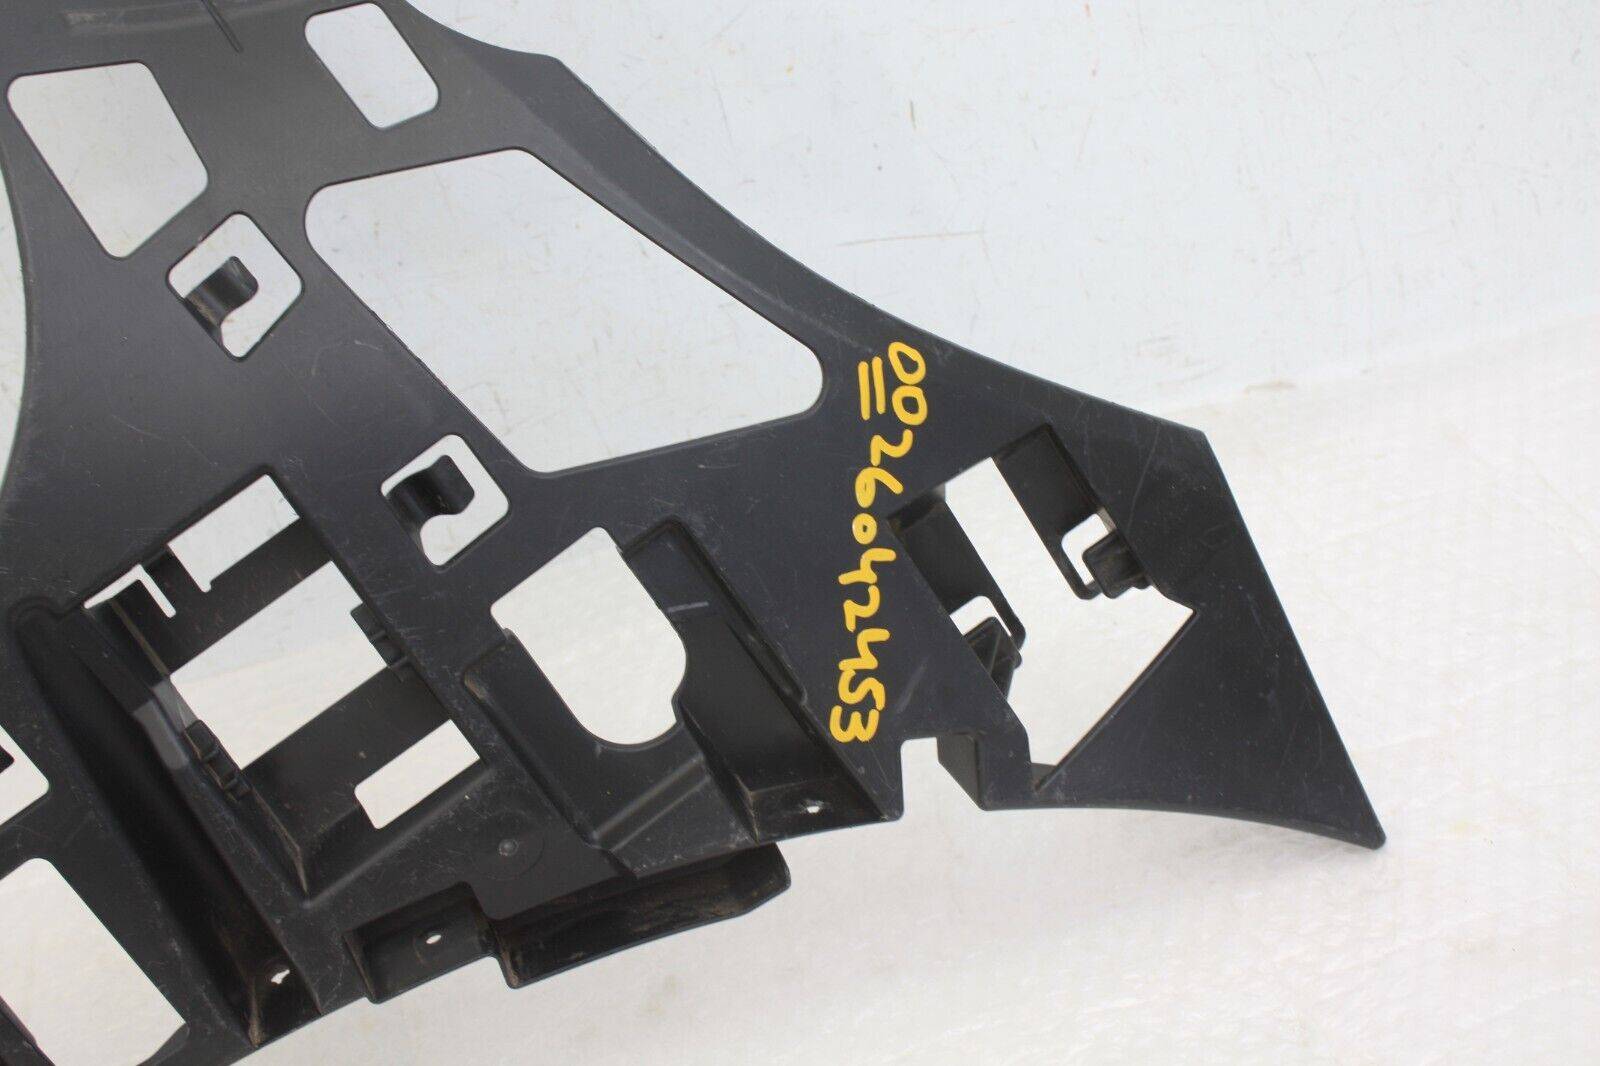 Mercedes-S-Class-W222-AMG-Front-Bumper-Left-Bracket-2017-TO-2021-A2228856800-176352019956-3